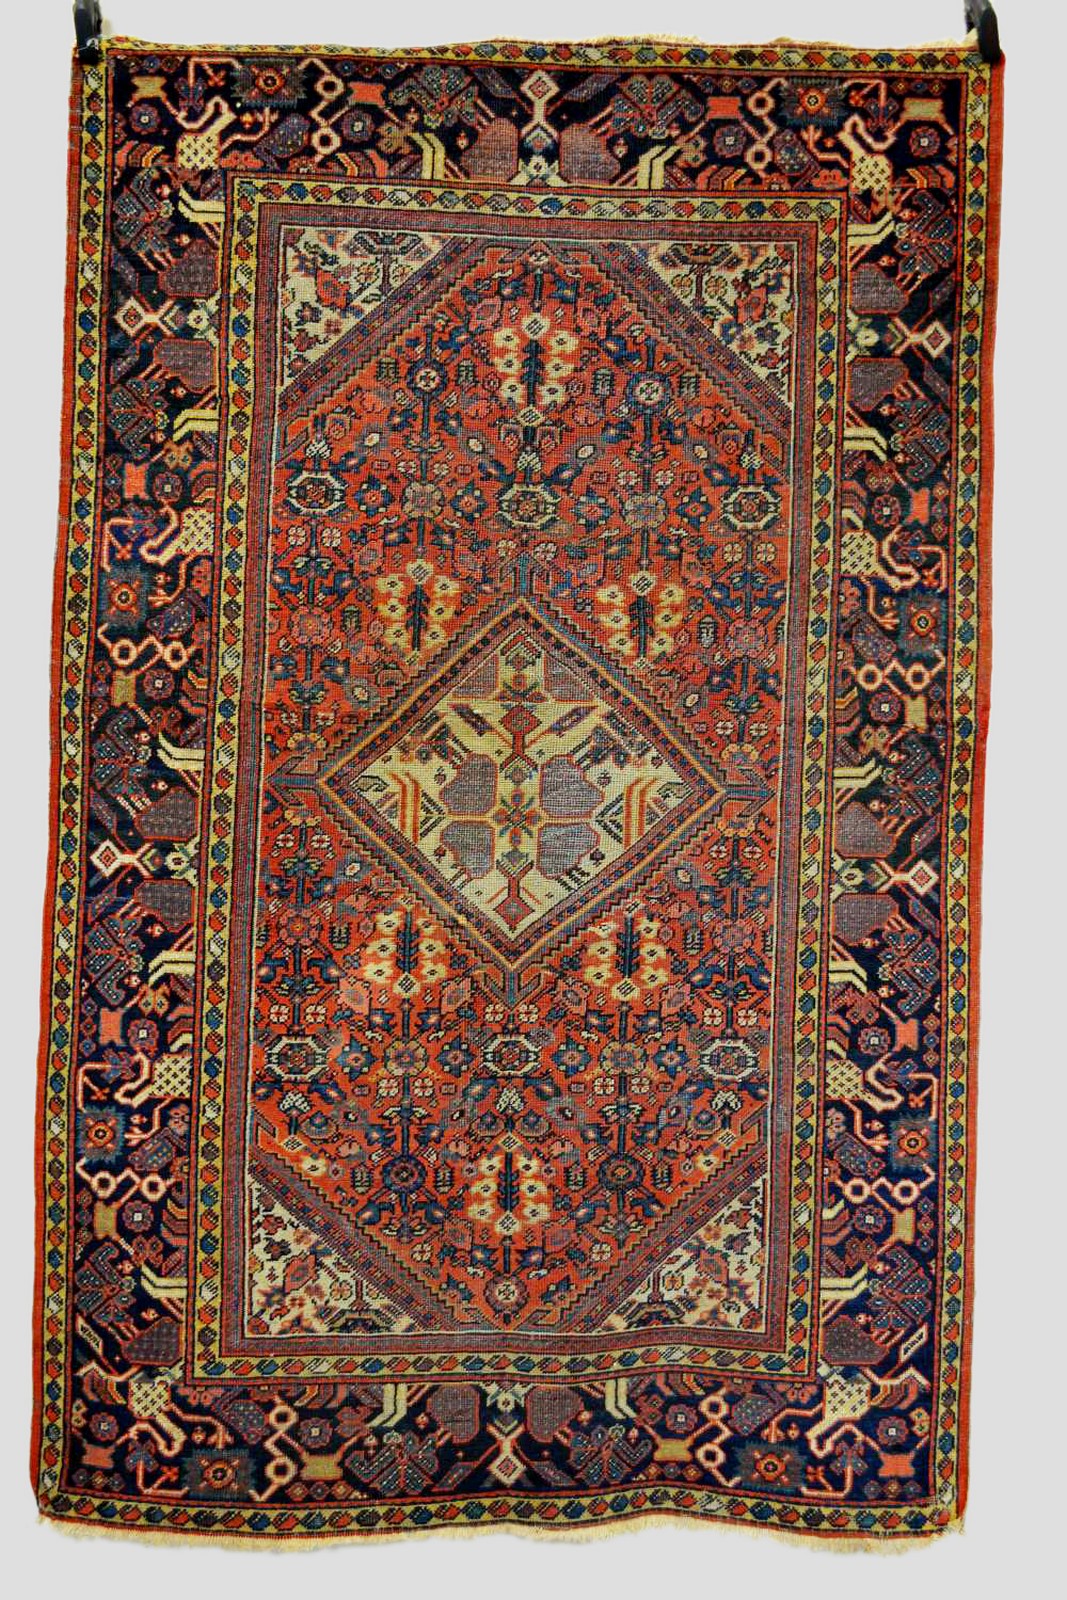 Mahal rug, north west Persia, about 1930s, 6ft. 6in. x 4ft. 2in. 1.98m. x 1.27m. Overall wear; small